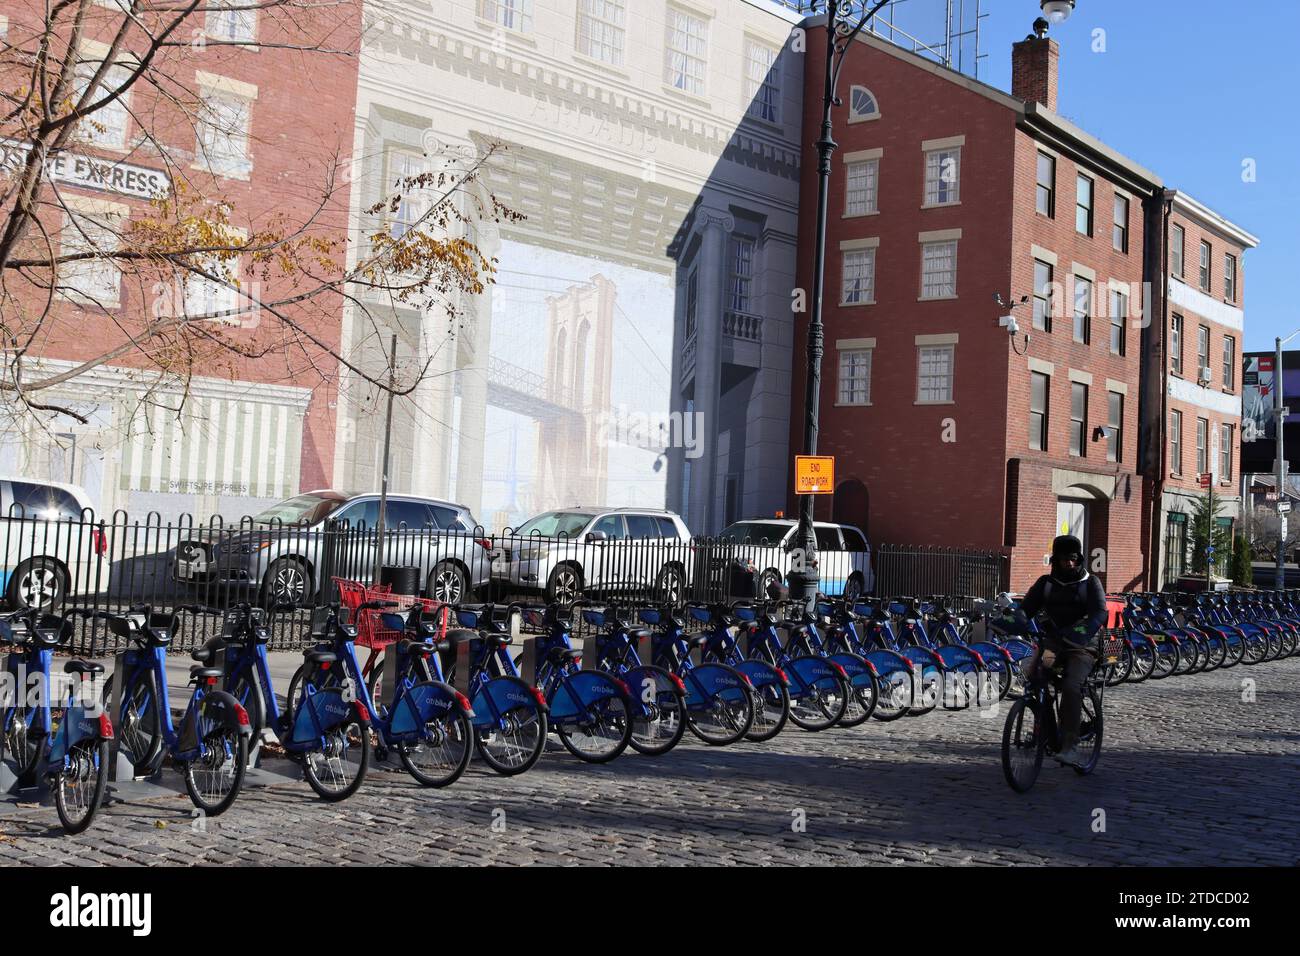 Citibike station by of mural of Brooklyn Bridge on Con Edison Seaport Substation on Peck Slip at South Street Seaport in lower Manhattan, New York Stock Photo